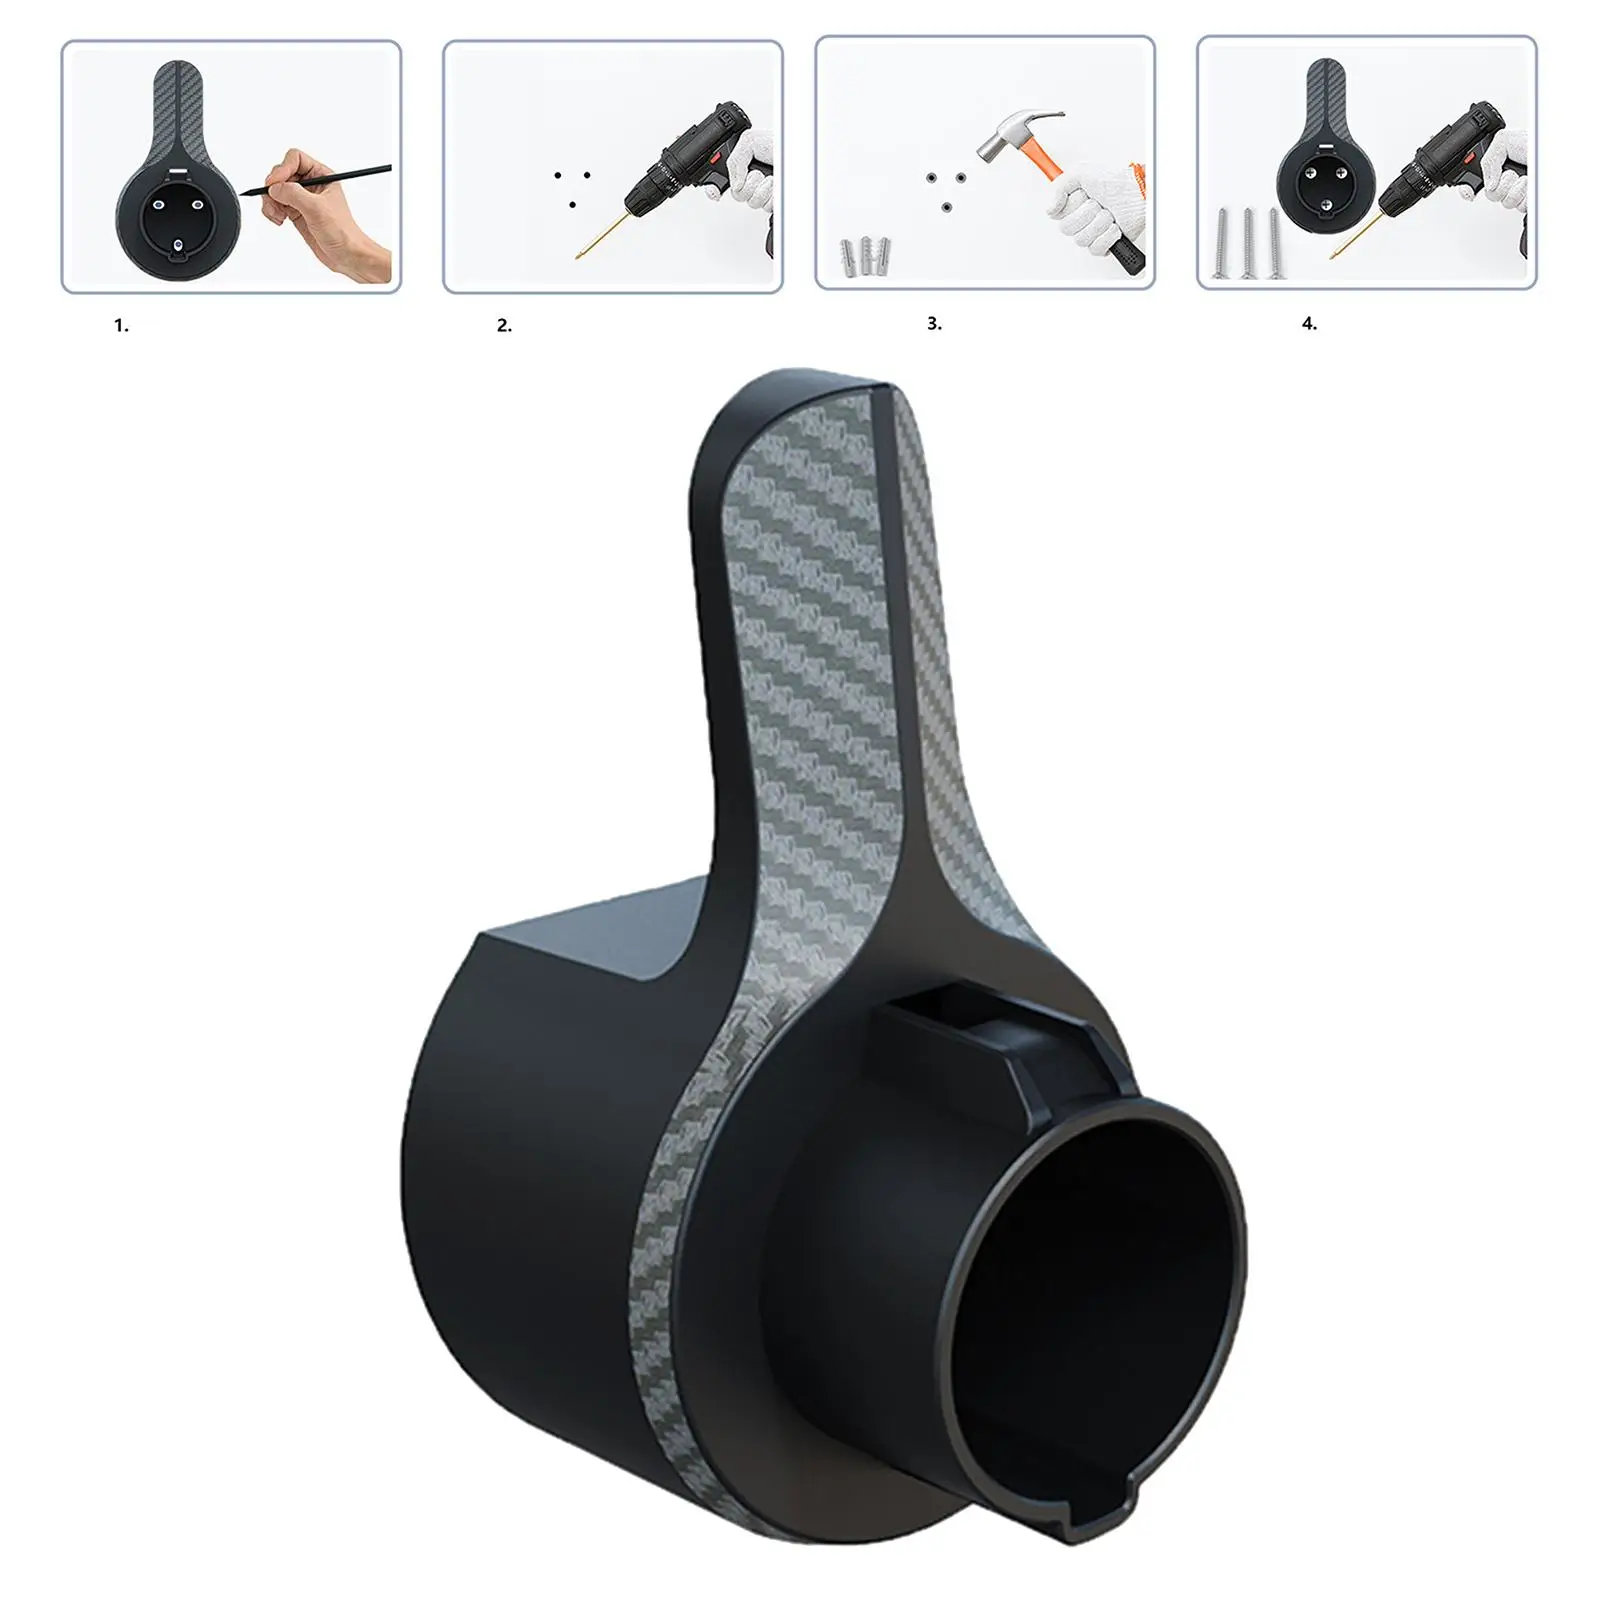 

Wall Mounted EV Charger Holder Multifunctional Sturdy Smple to Install EV Charging Cable Holder